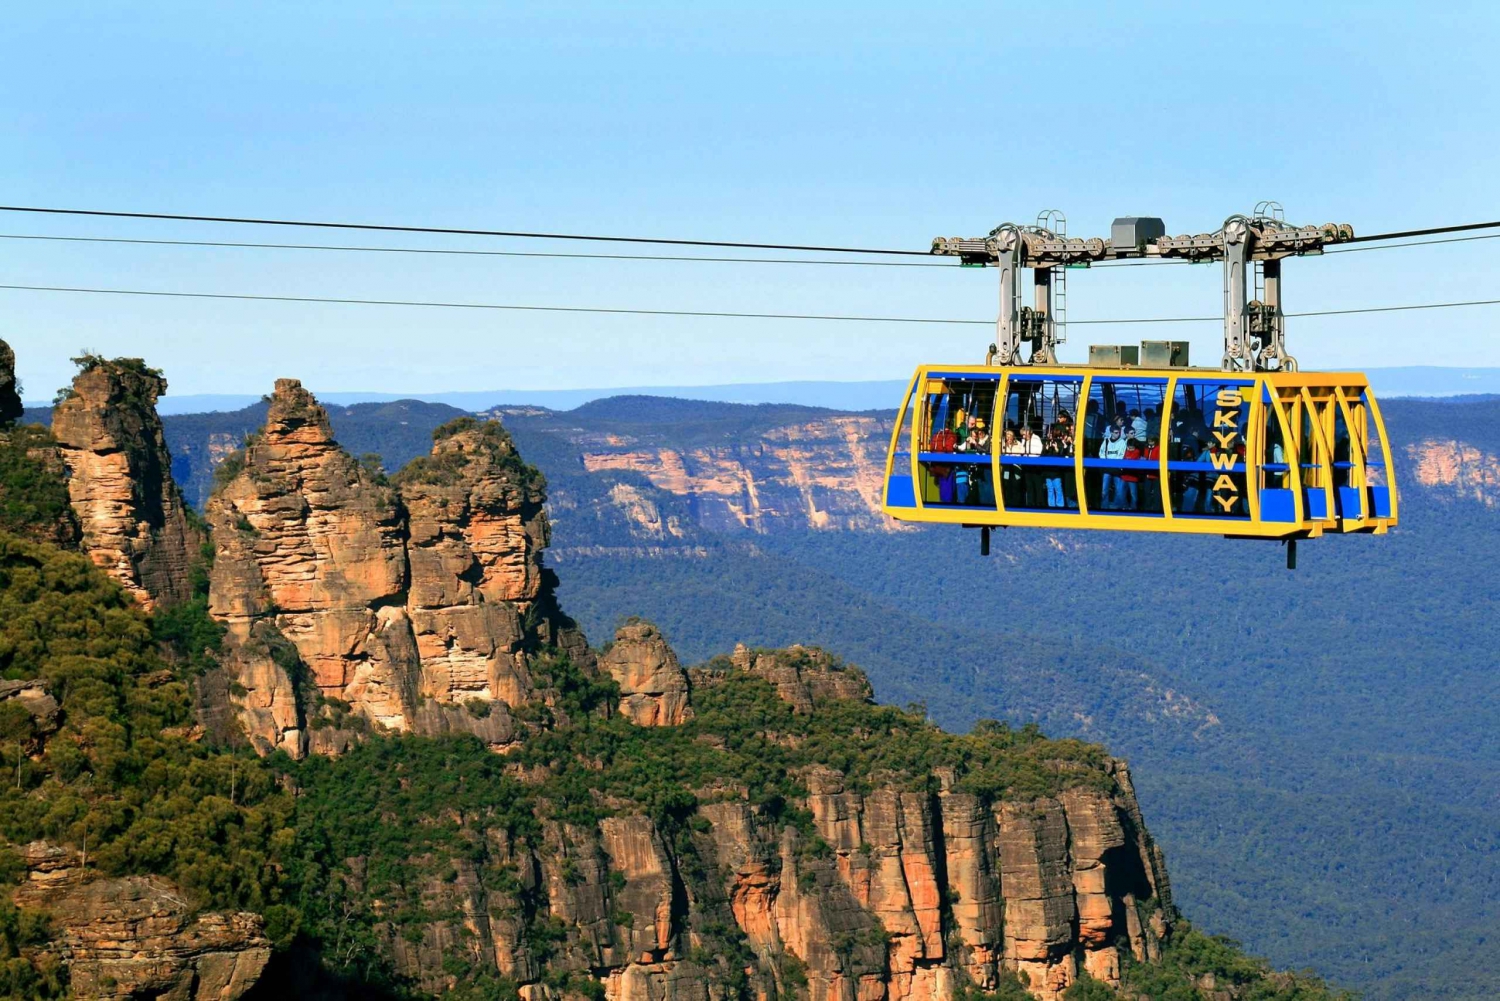 Blue Mountains tour with a river cruise for small groups